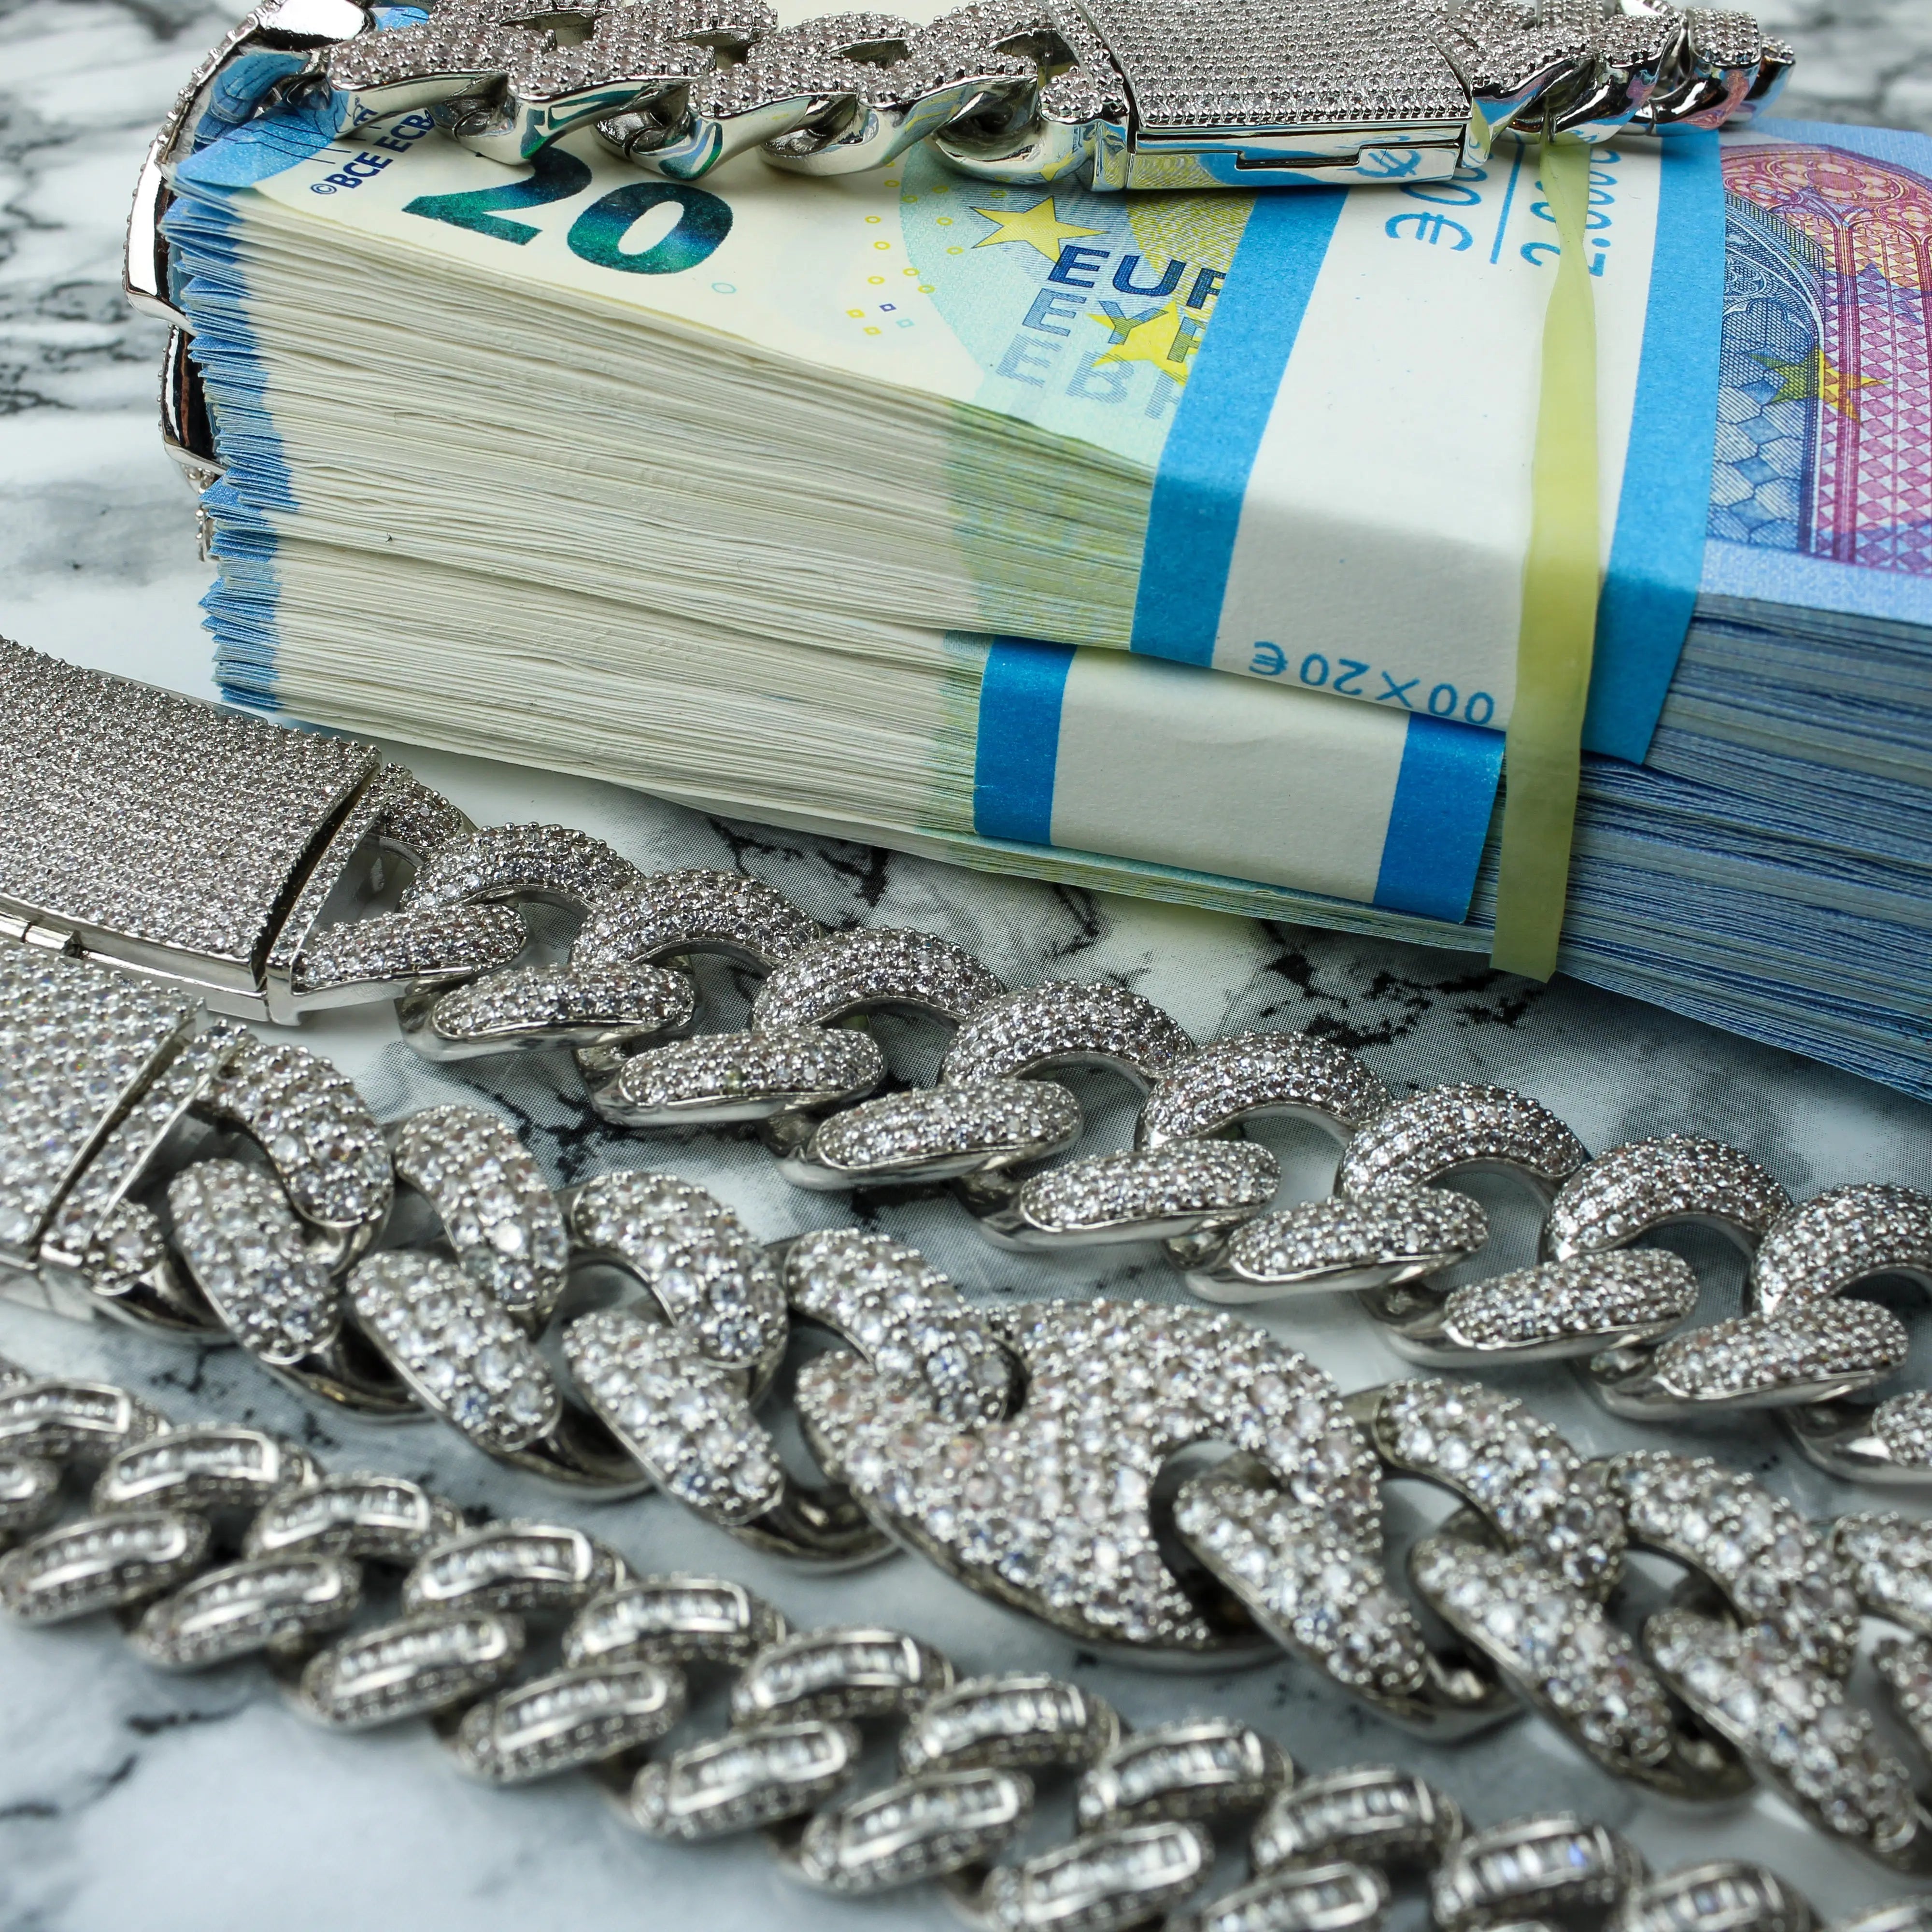 20mm Iced Cuban Link Chain in White Gold | - The Icetruck